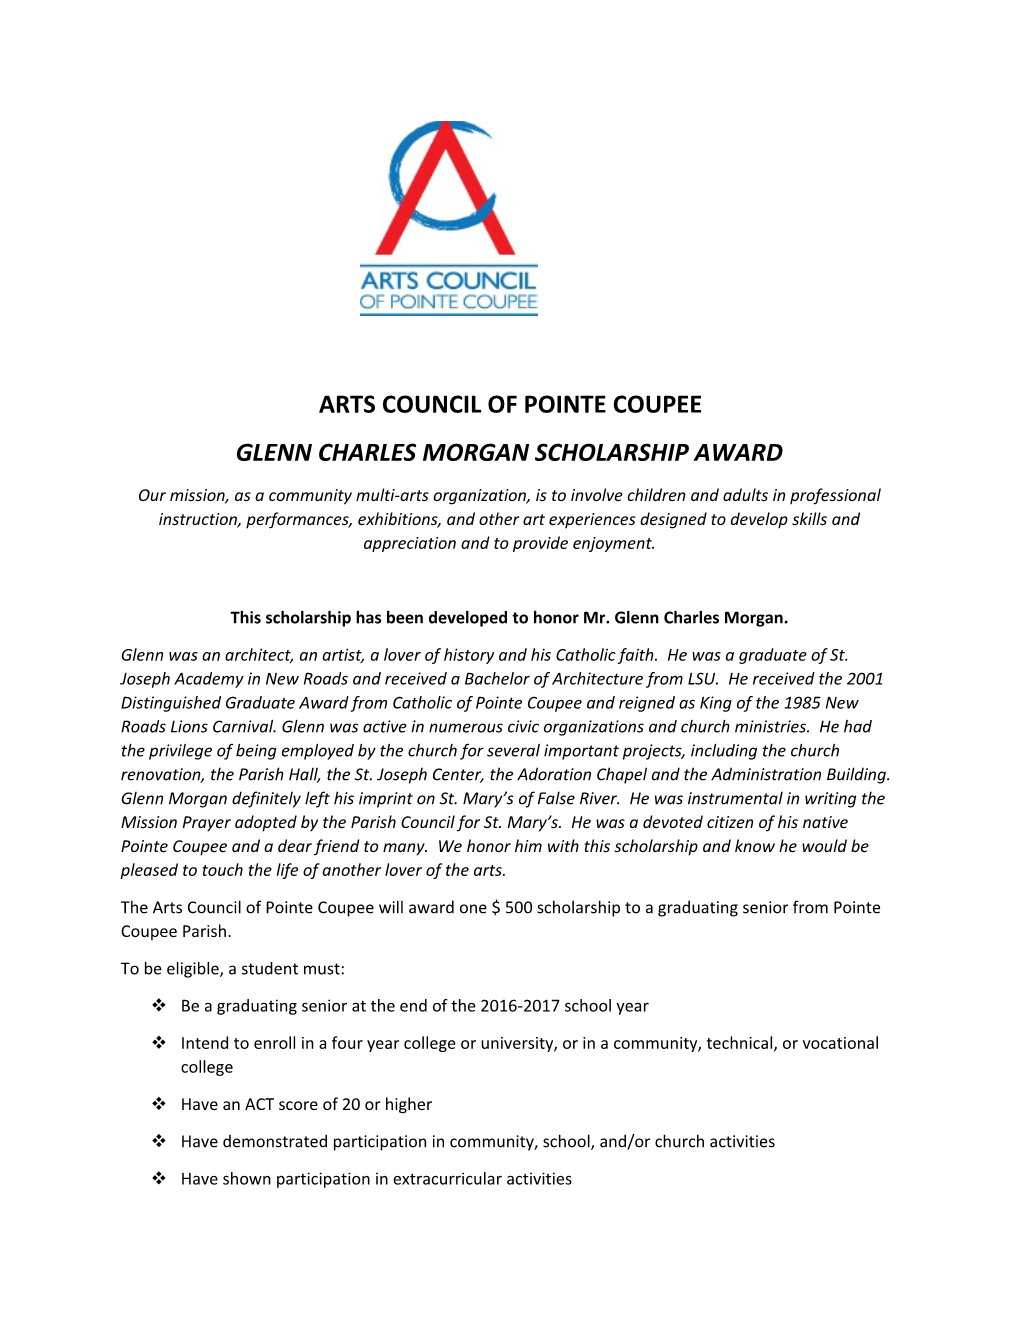 Arts Council of Pointe Coupee